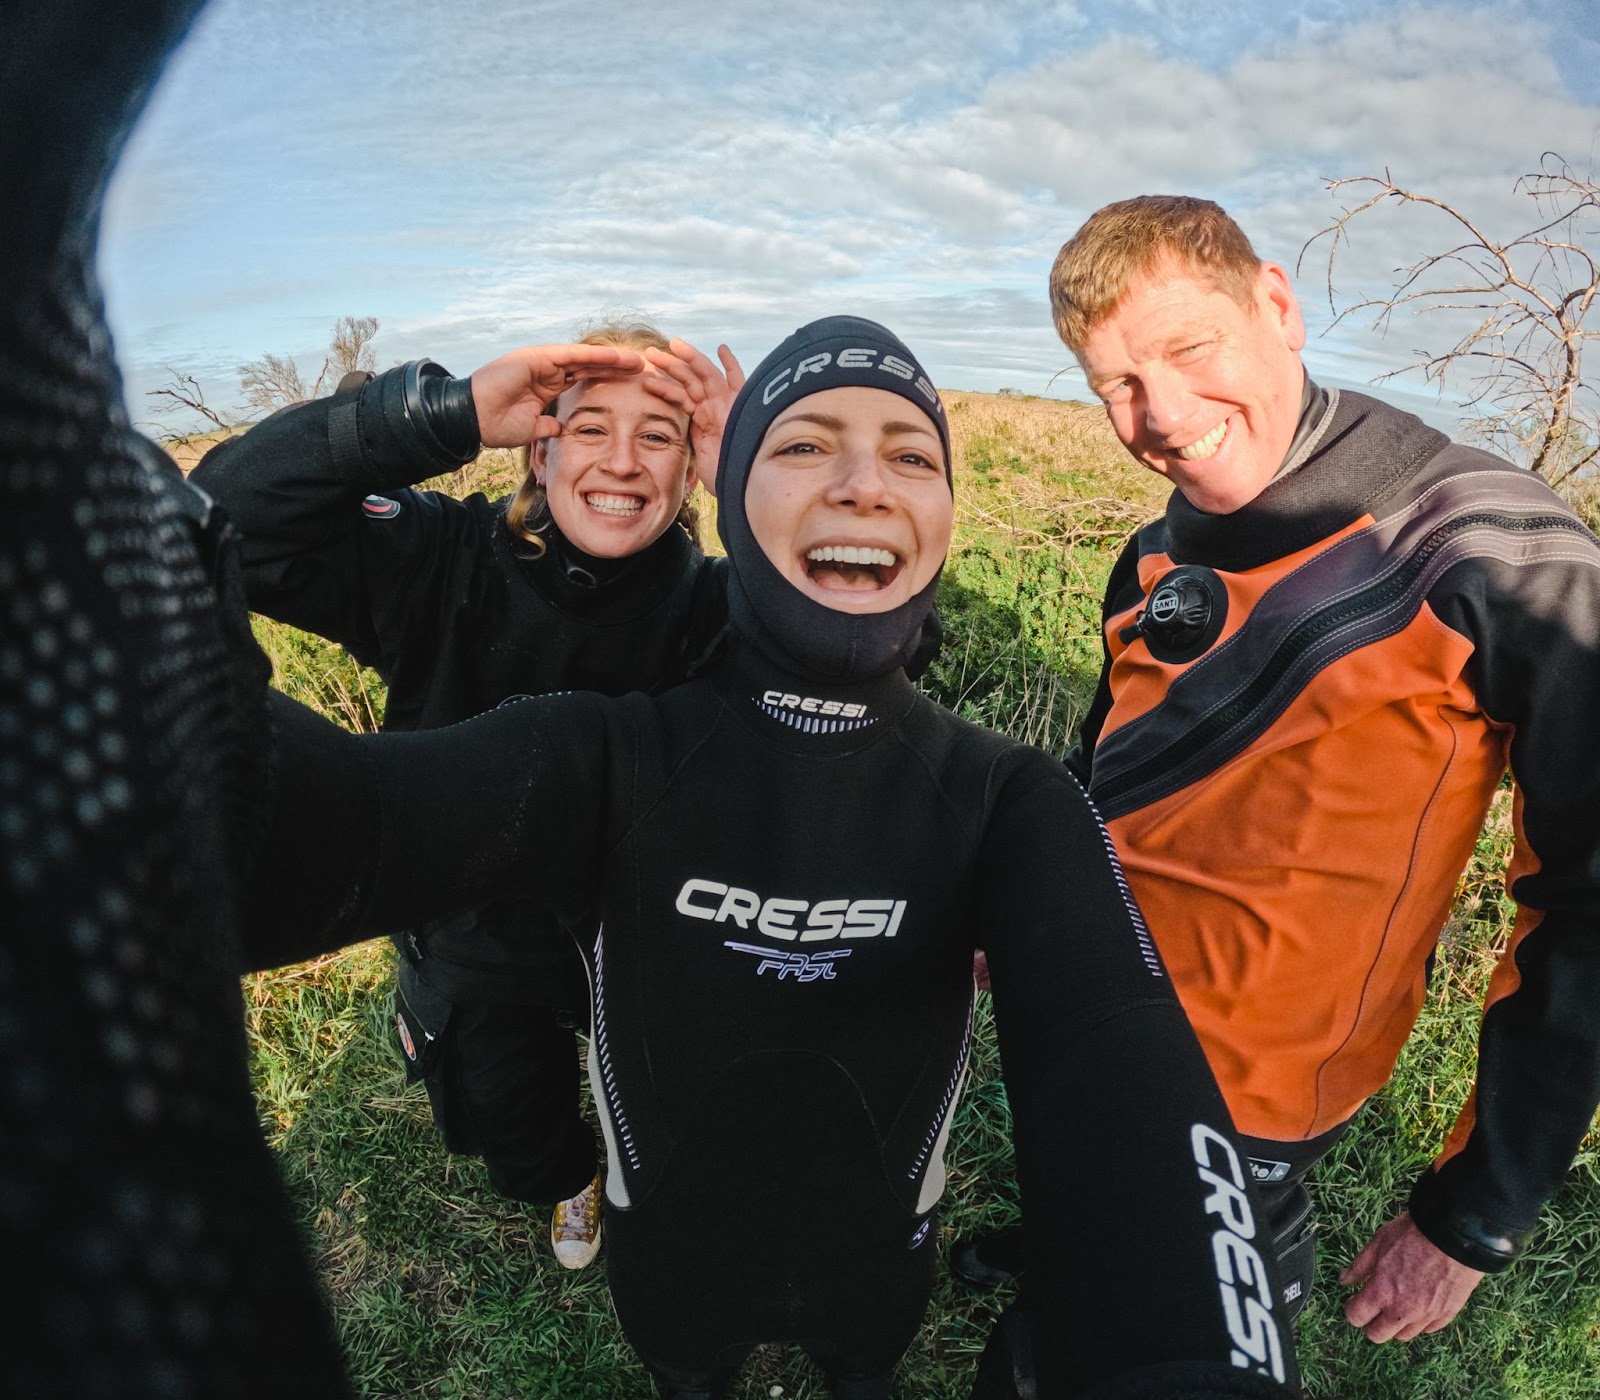 The Dive Experience team in Mt. Gambier, South Australia